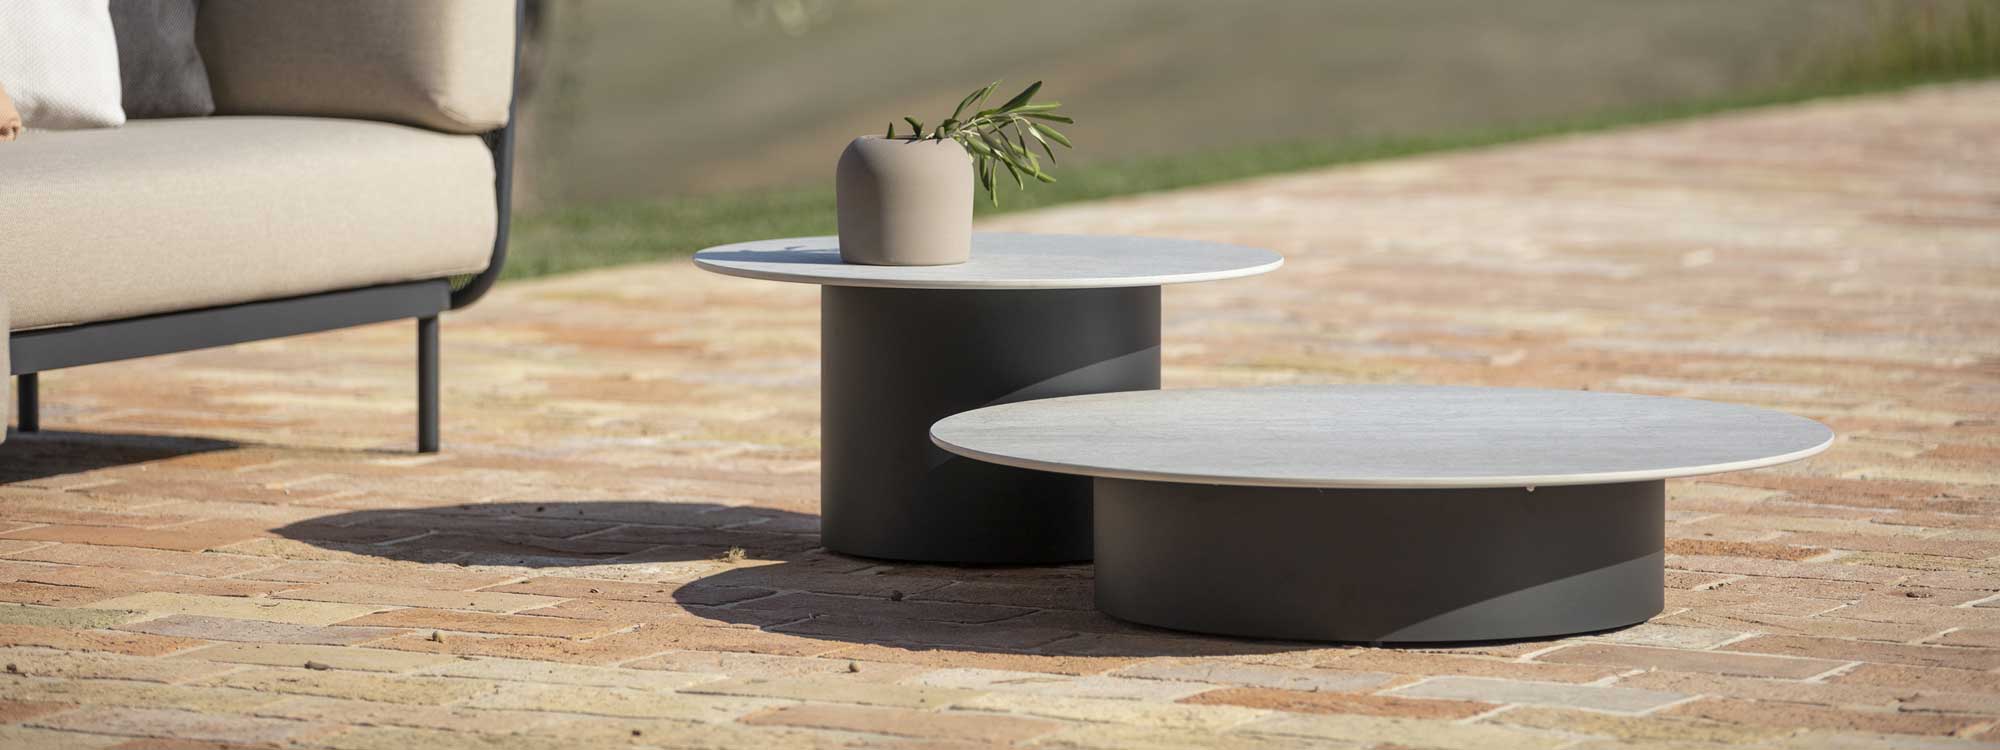 Branta exterior low tables have modern design by Studio Segers for Todus luxury outdoor furniture company